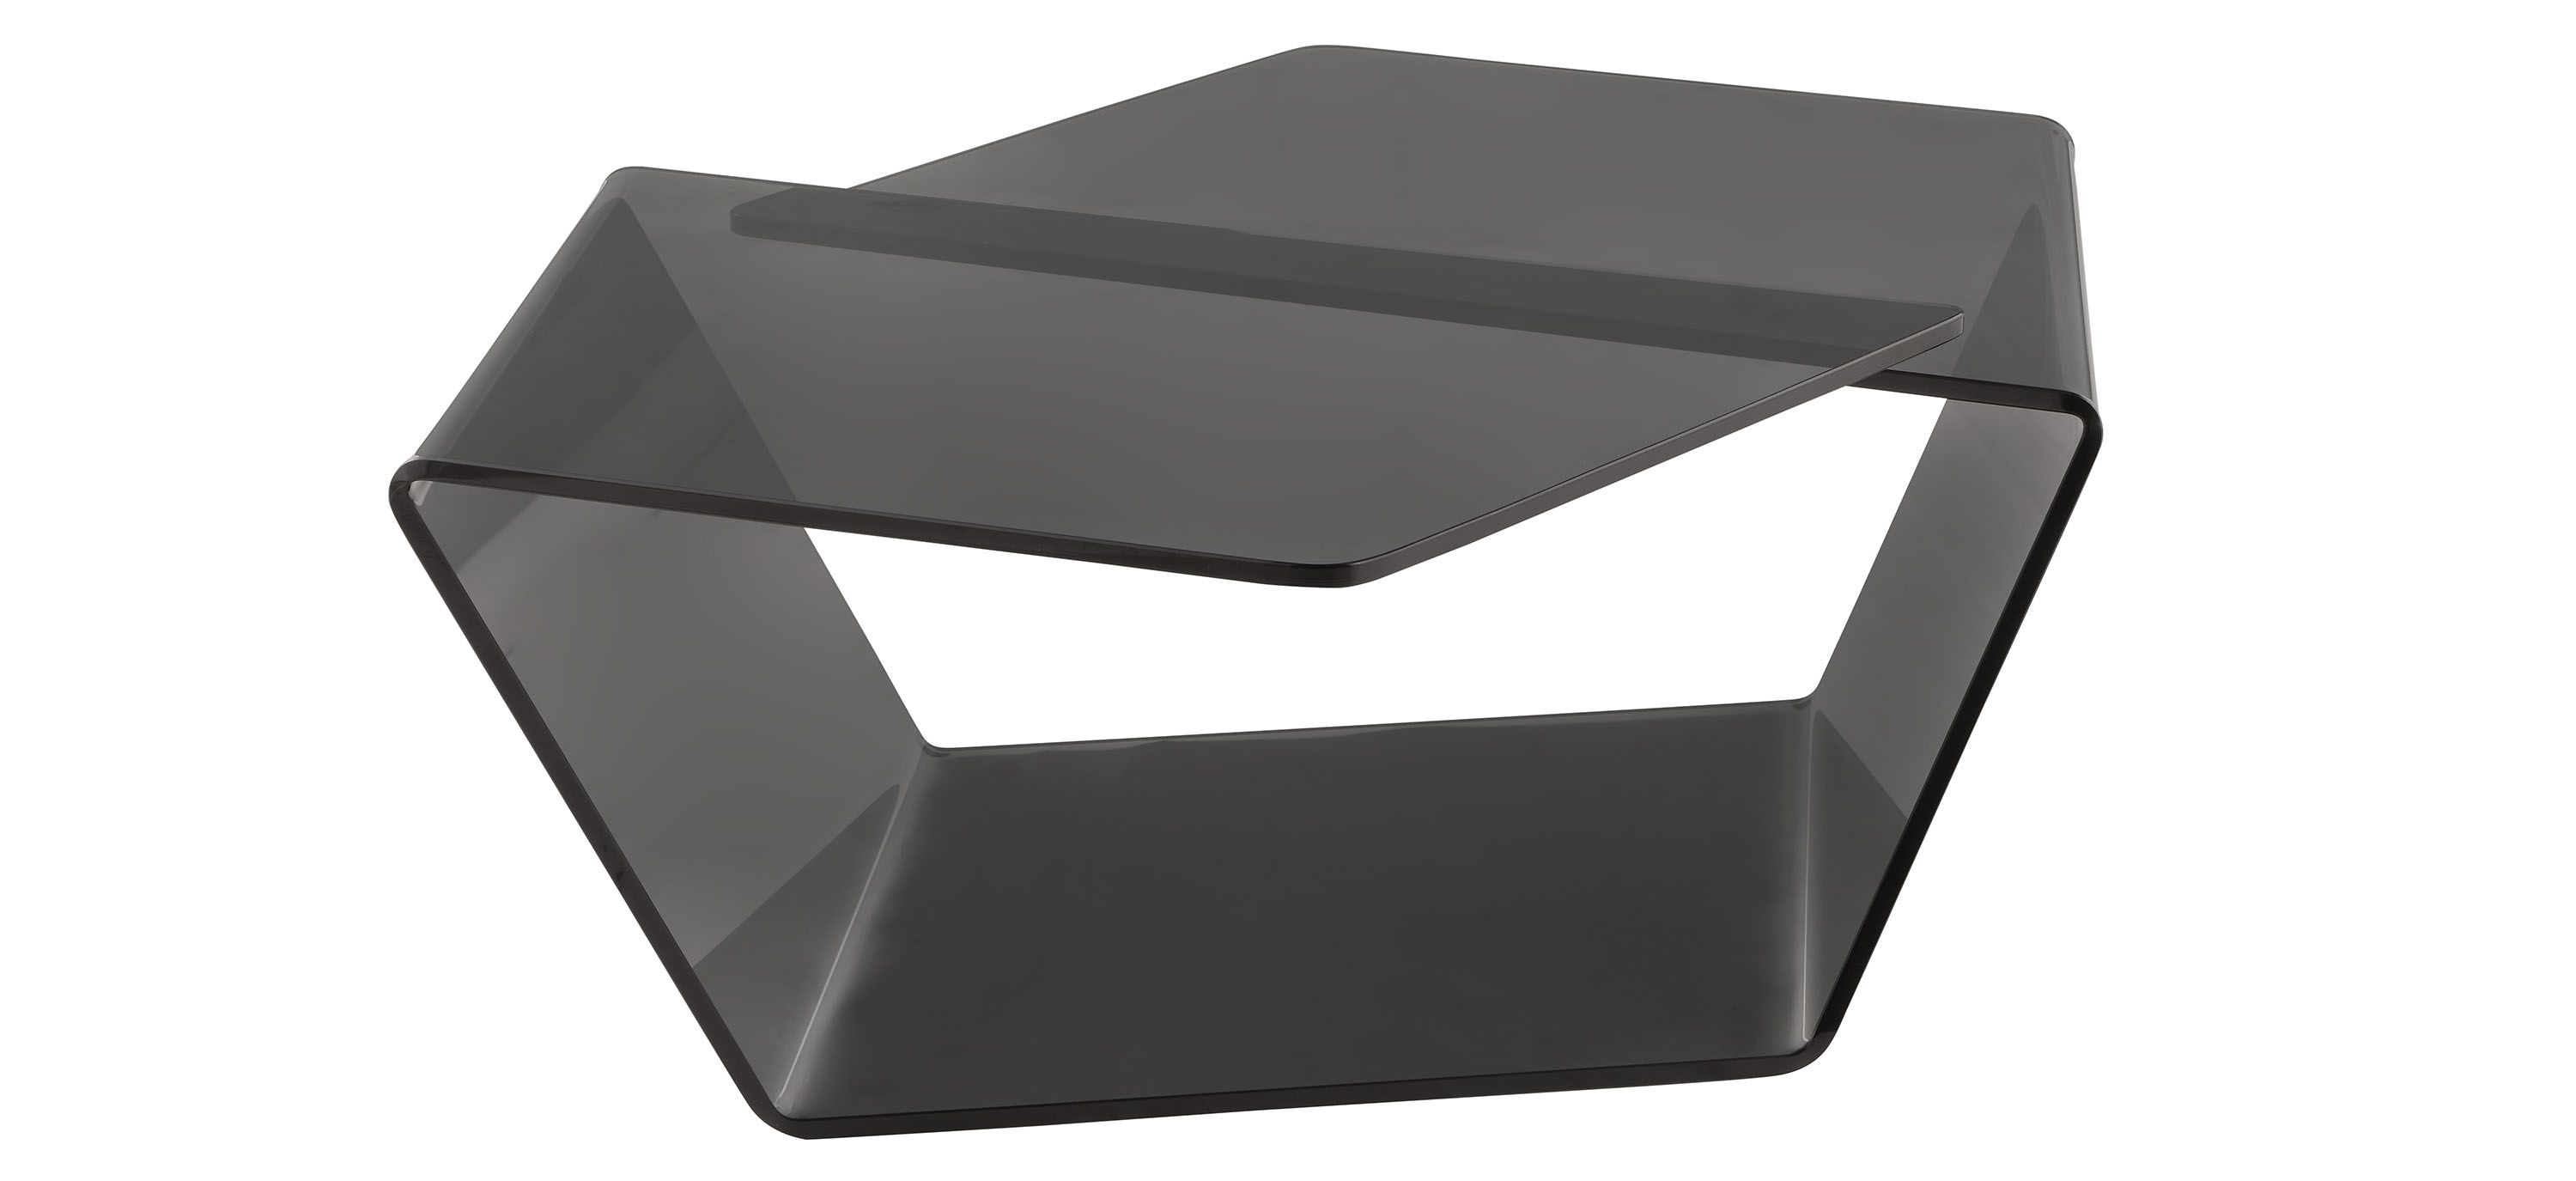 Soar Tinted Bent Glass Cocktail Table